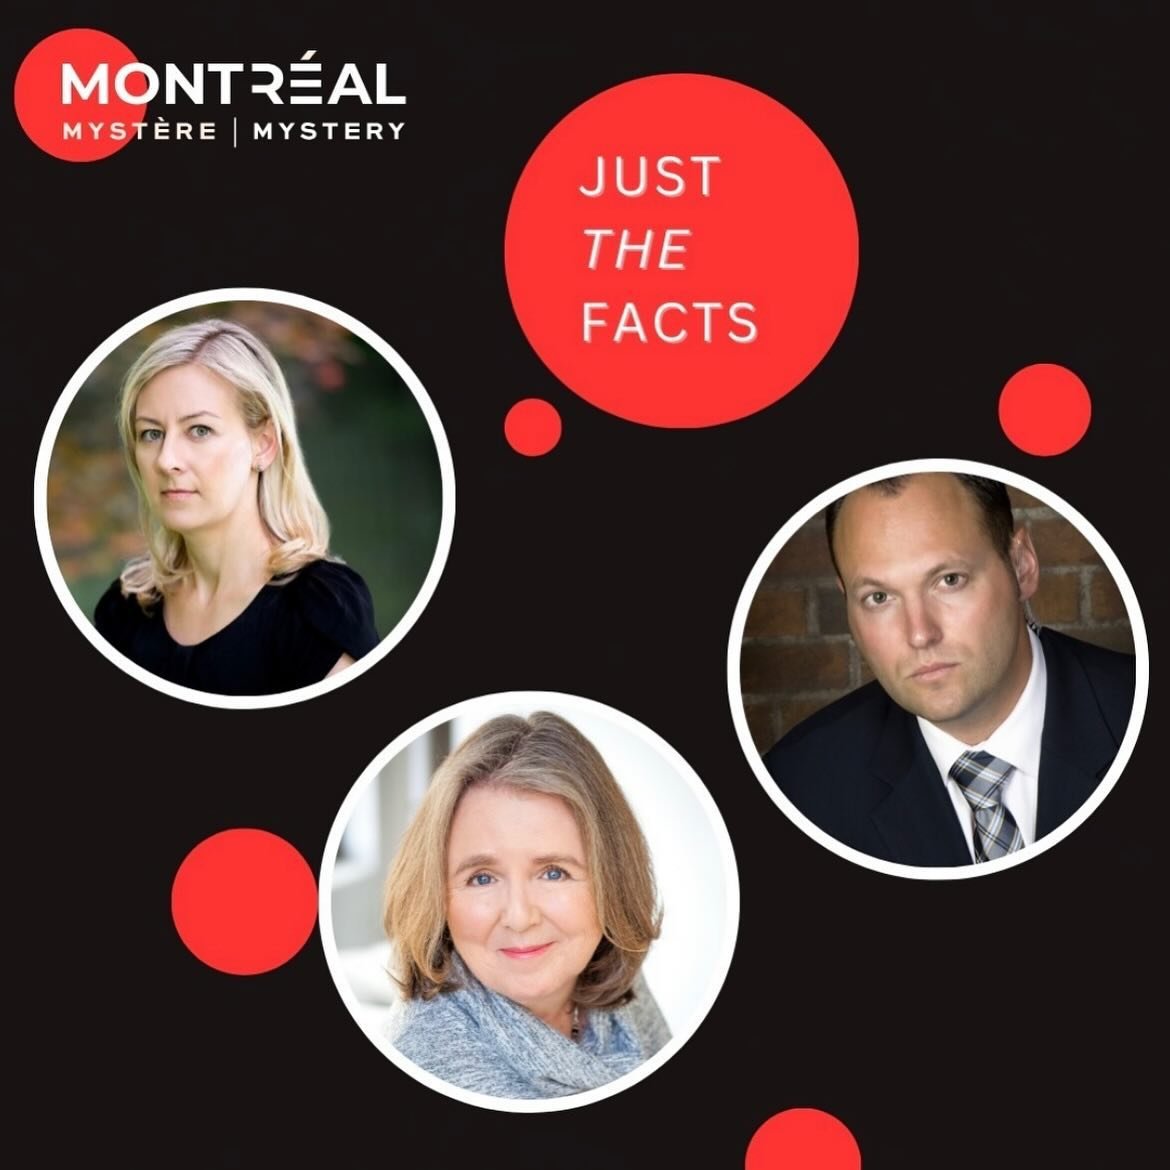 I couldn&rsquo;t be more excited to return to my home city for the first-ever @montrealmysteryfestival, where I&rsquo;ll be talking about fact-inspired mysteries and thrillers with @simongervaisbooks, @martineau.maureen, and moderator @picardonhealth